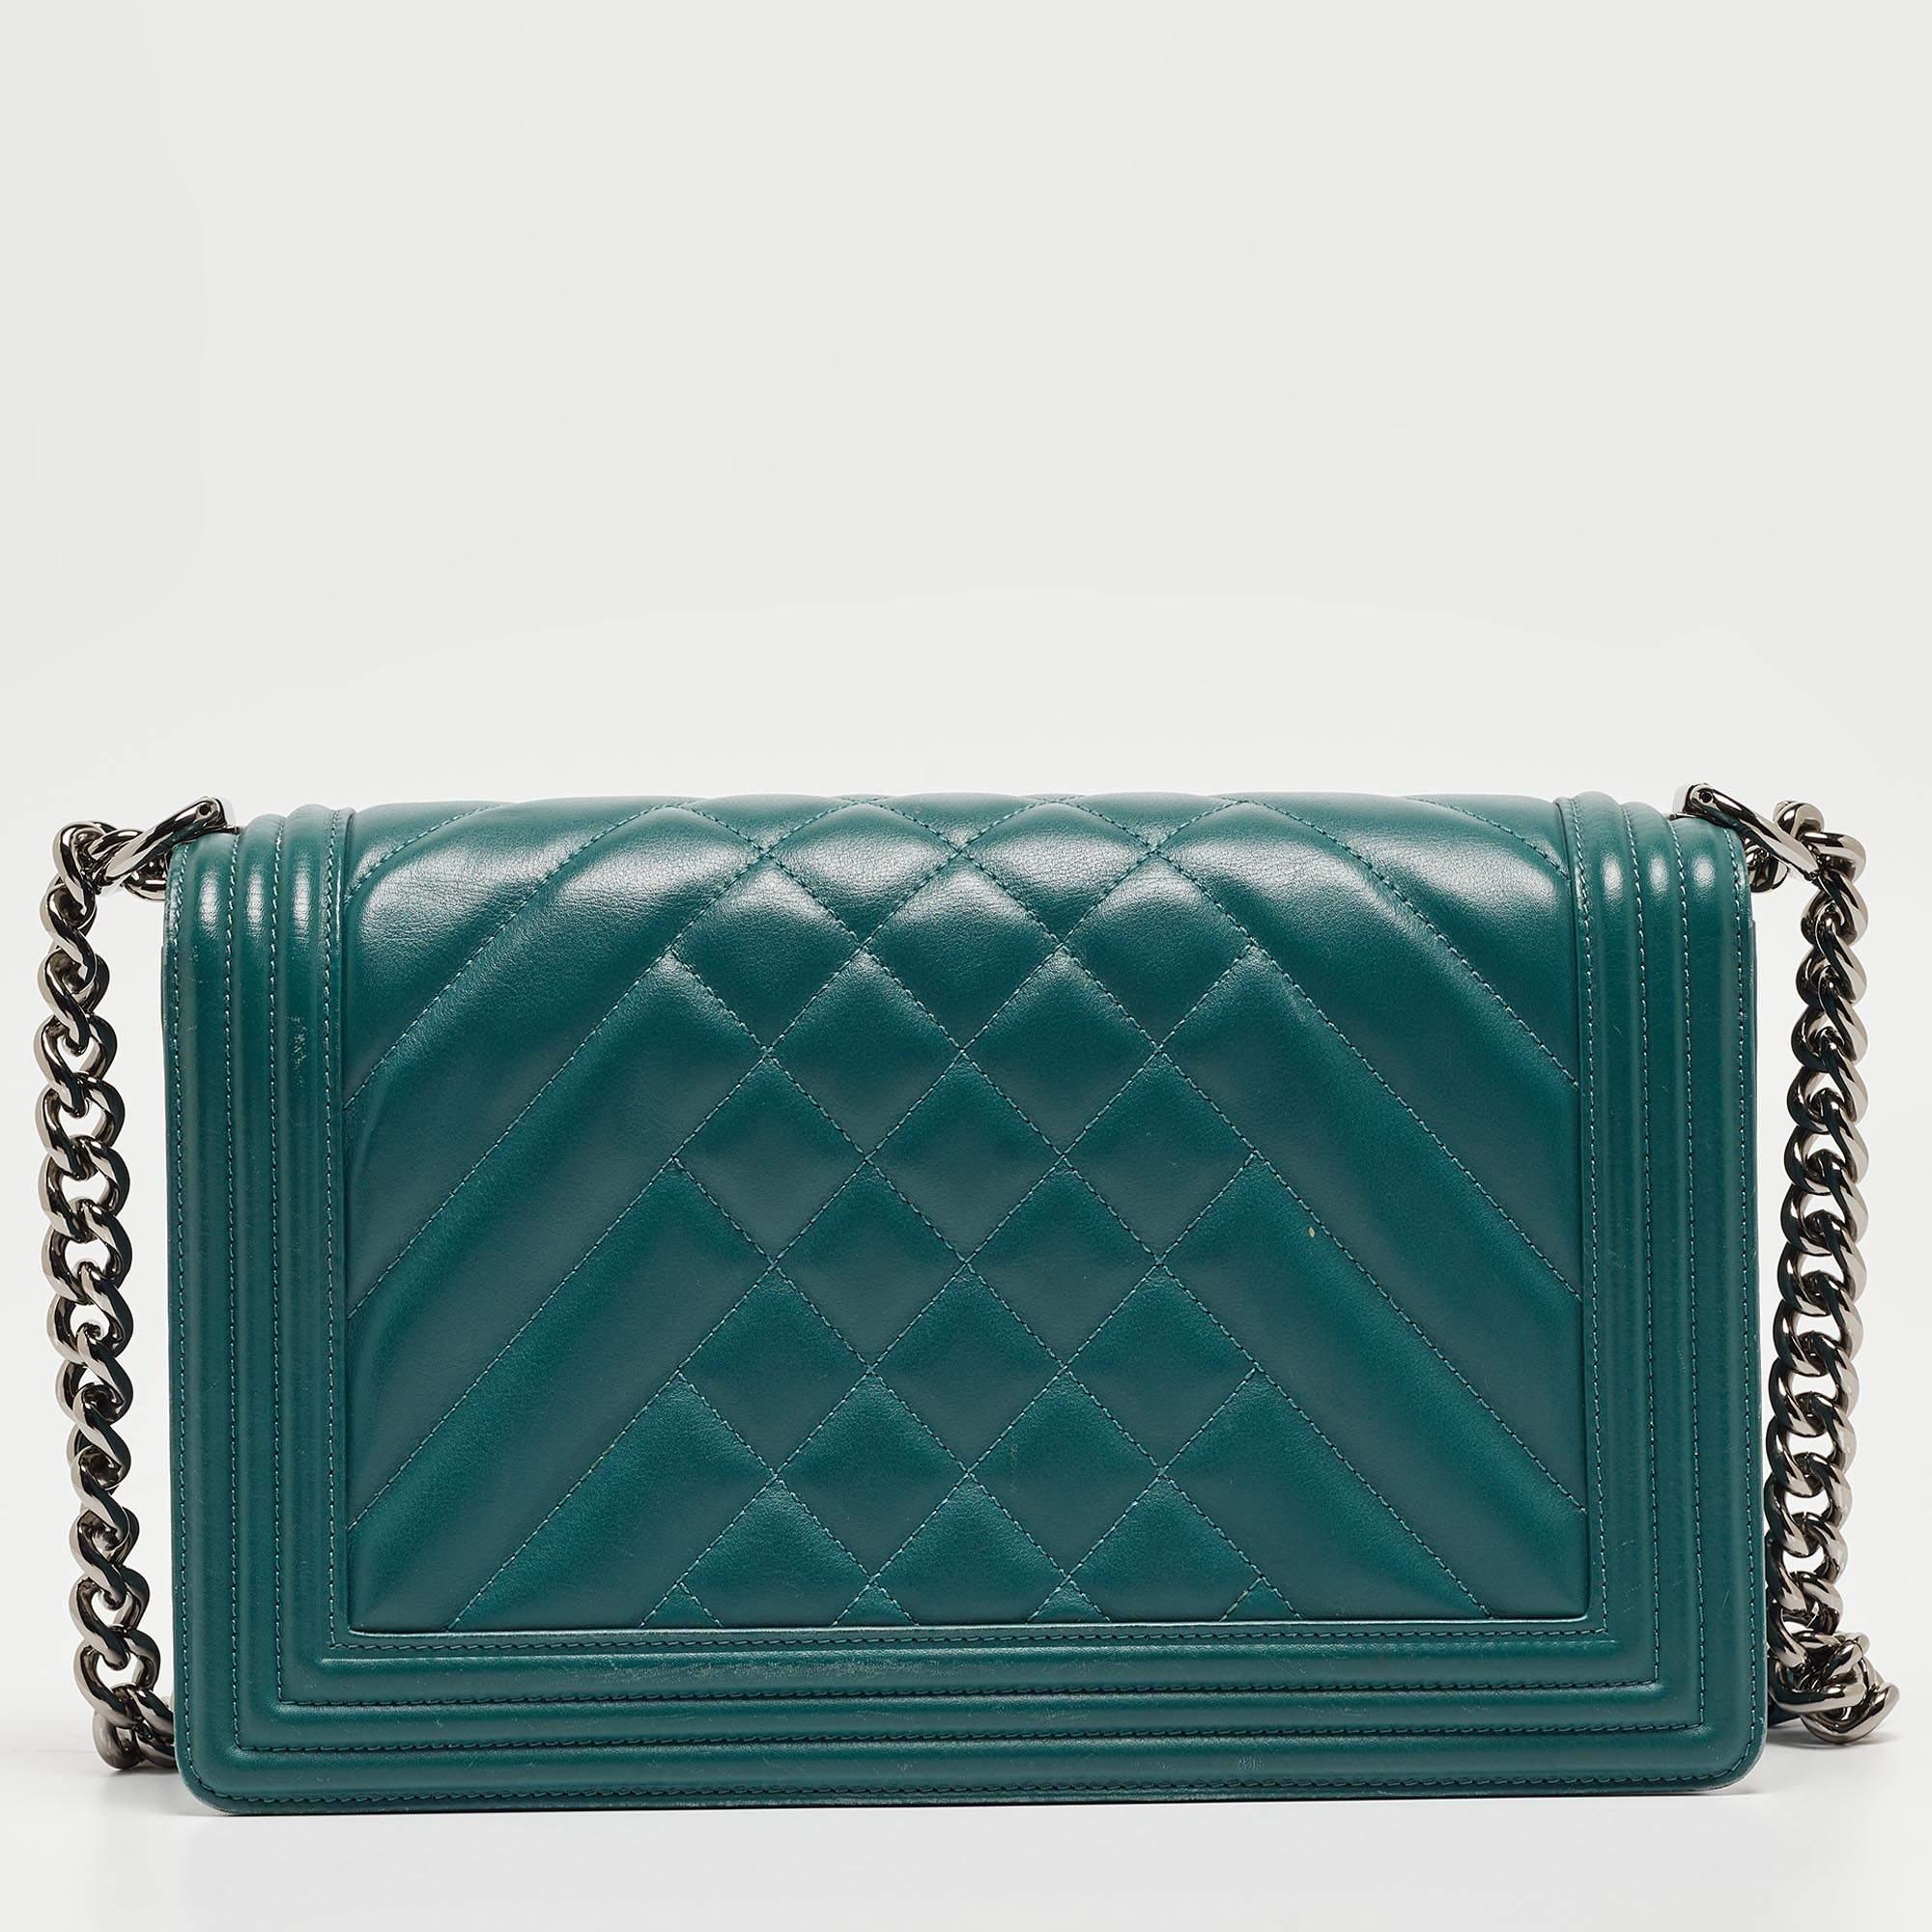 The Chanel New Medium Boy Bag exudes timeless elegance with its vibrant green hue and meticulously stitched quilted leather. The iconic Boy bag design features a silver-tone chain strap and the distinctive Boy clasp, making it a luxurious and